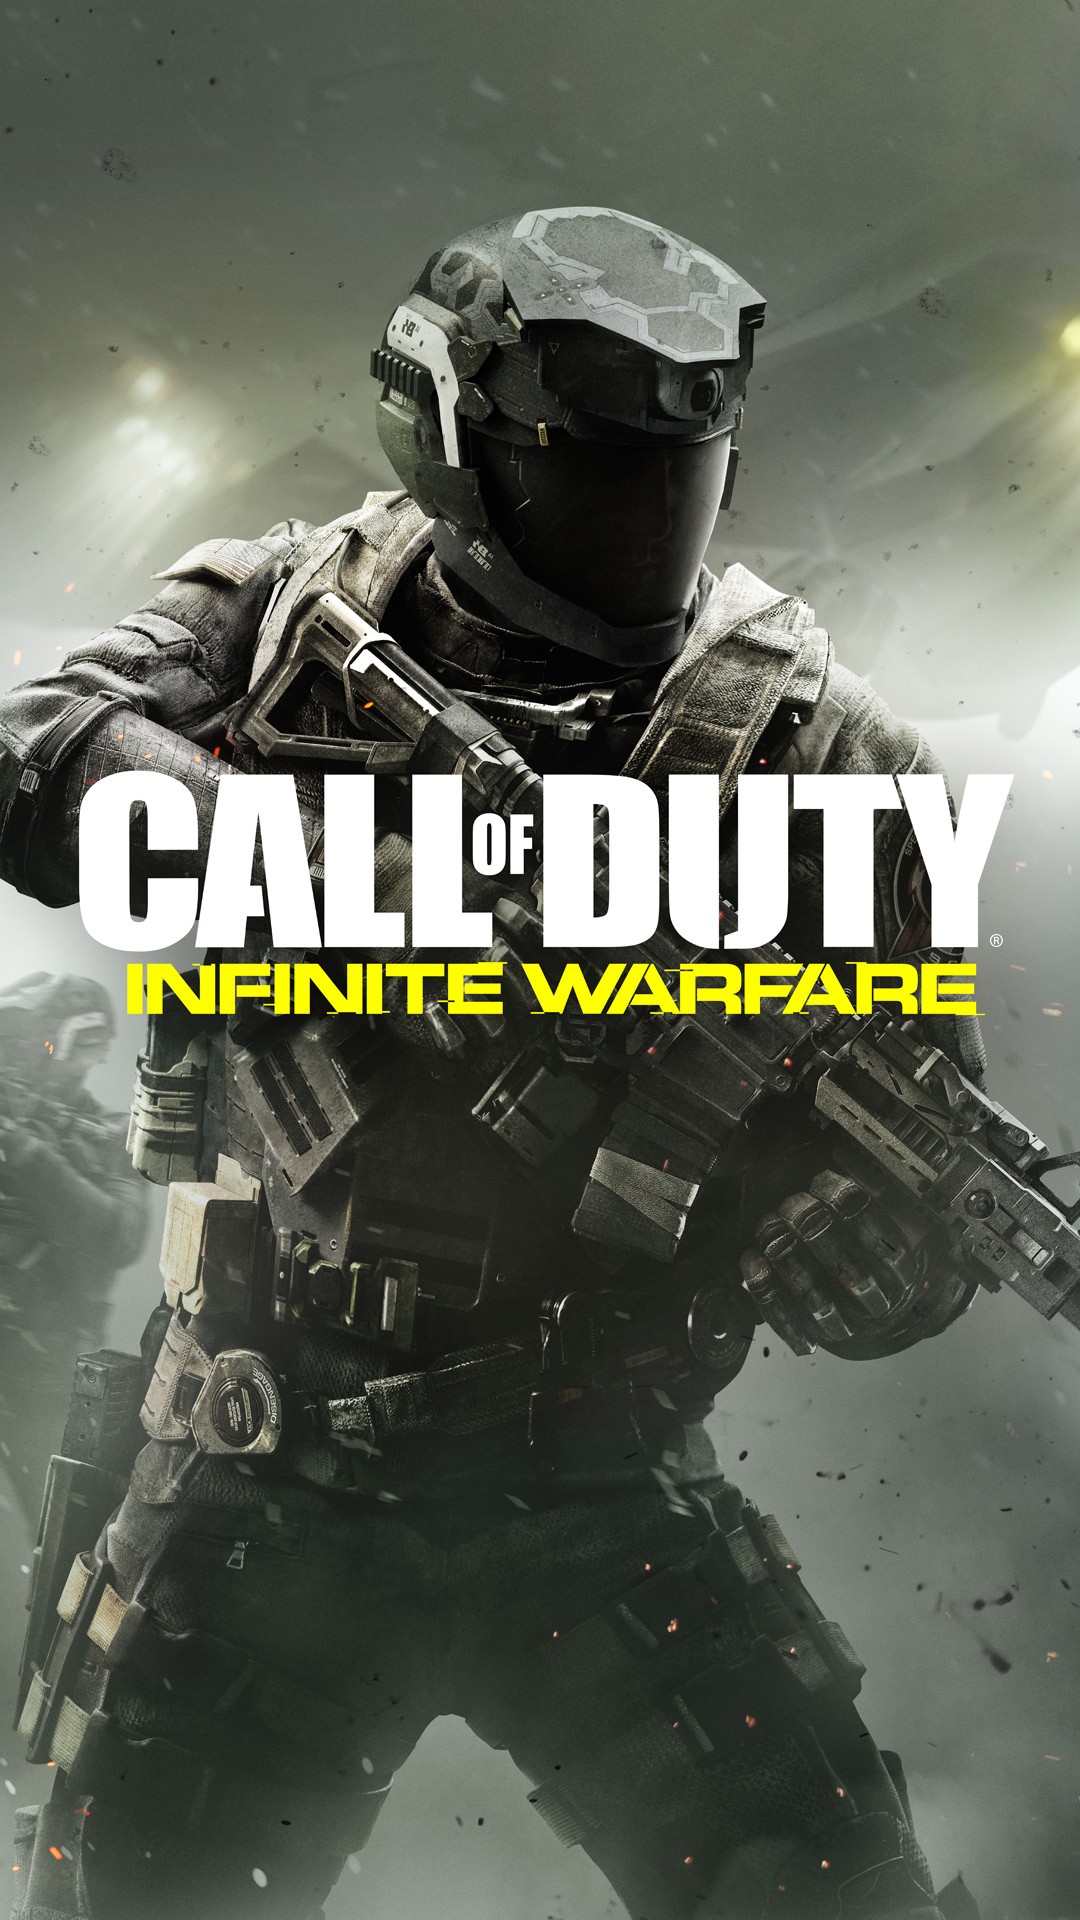 cod infinite warfare wallpaper,action adventure game,pc game,shooter game,movie,action film